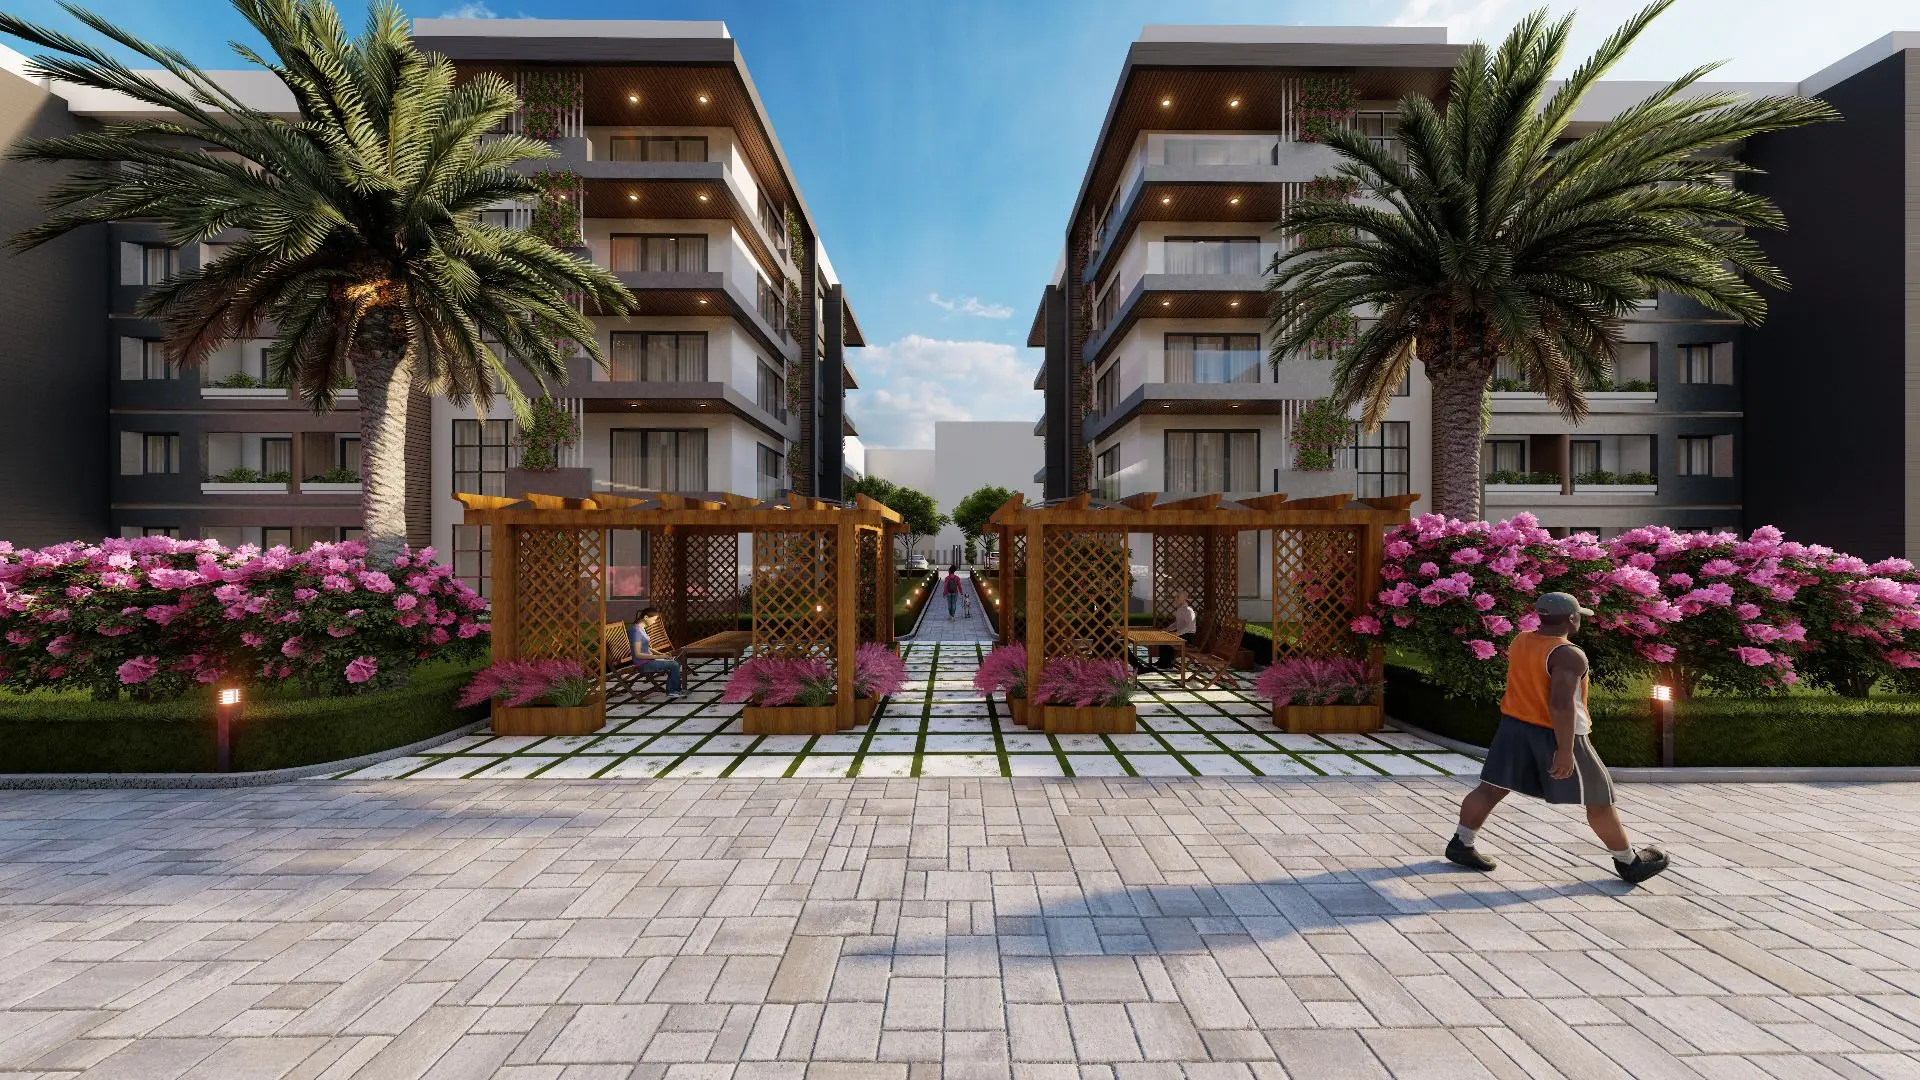 NEW COMPLEX PROJECT IN ANTALYA